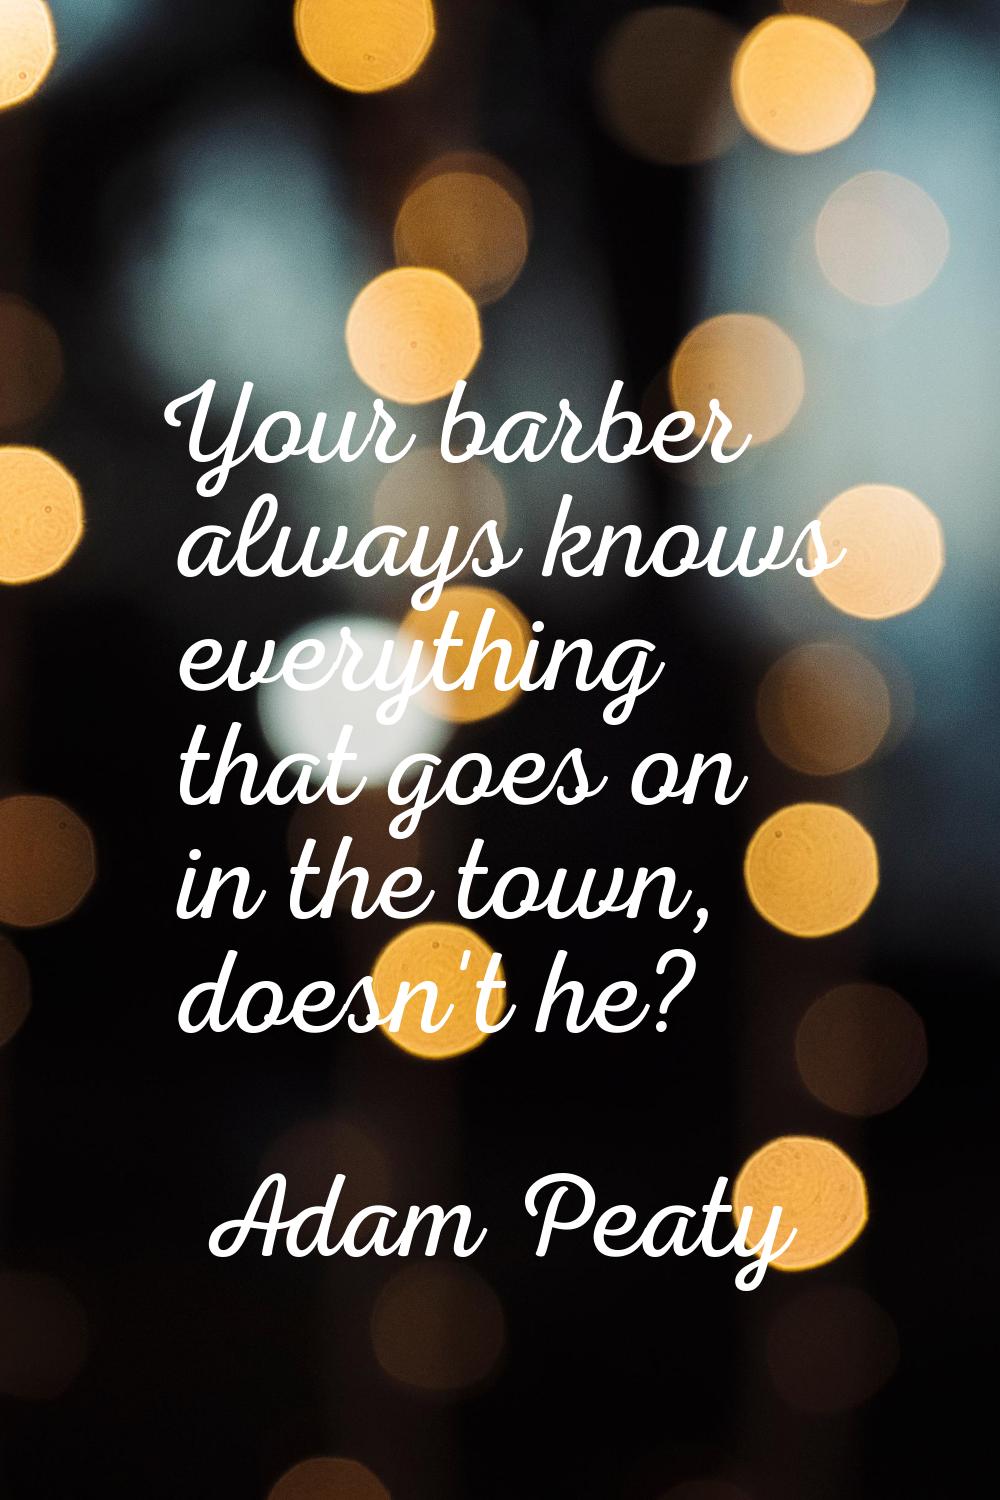 Your barber always knows everything that goes on in the town, doesn't he?